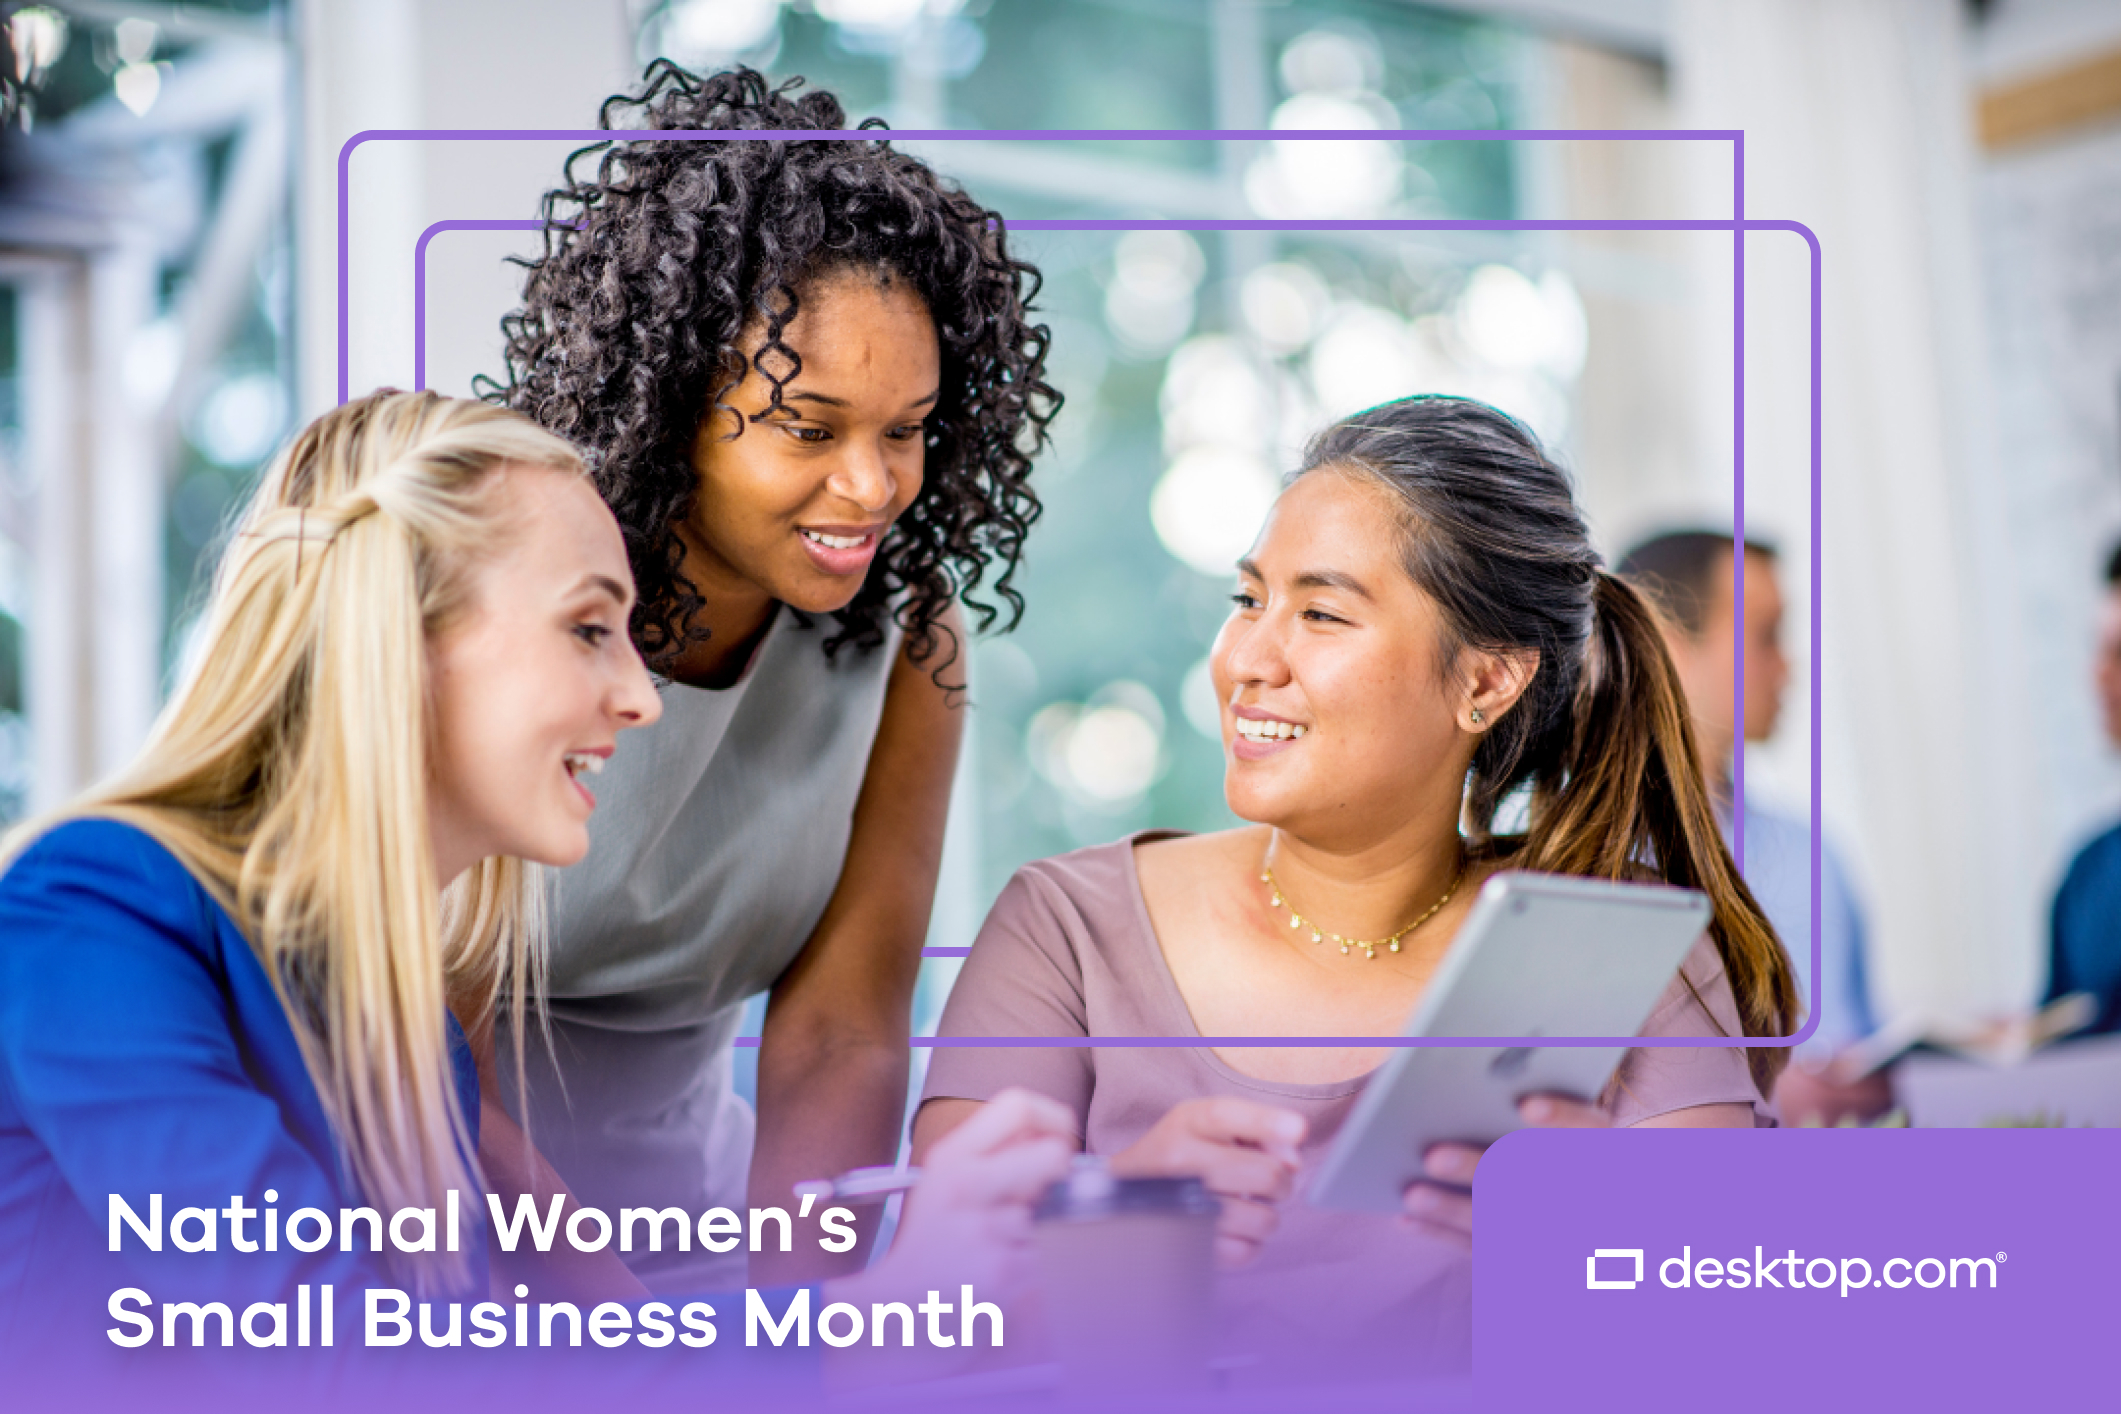 National Women’s Small Business Month